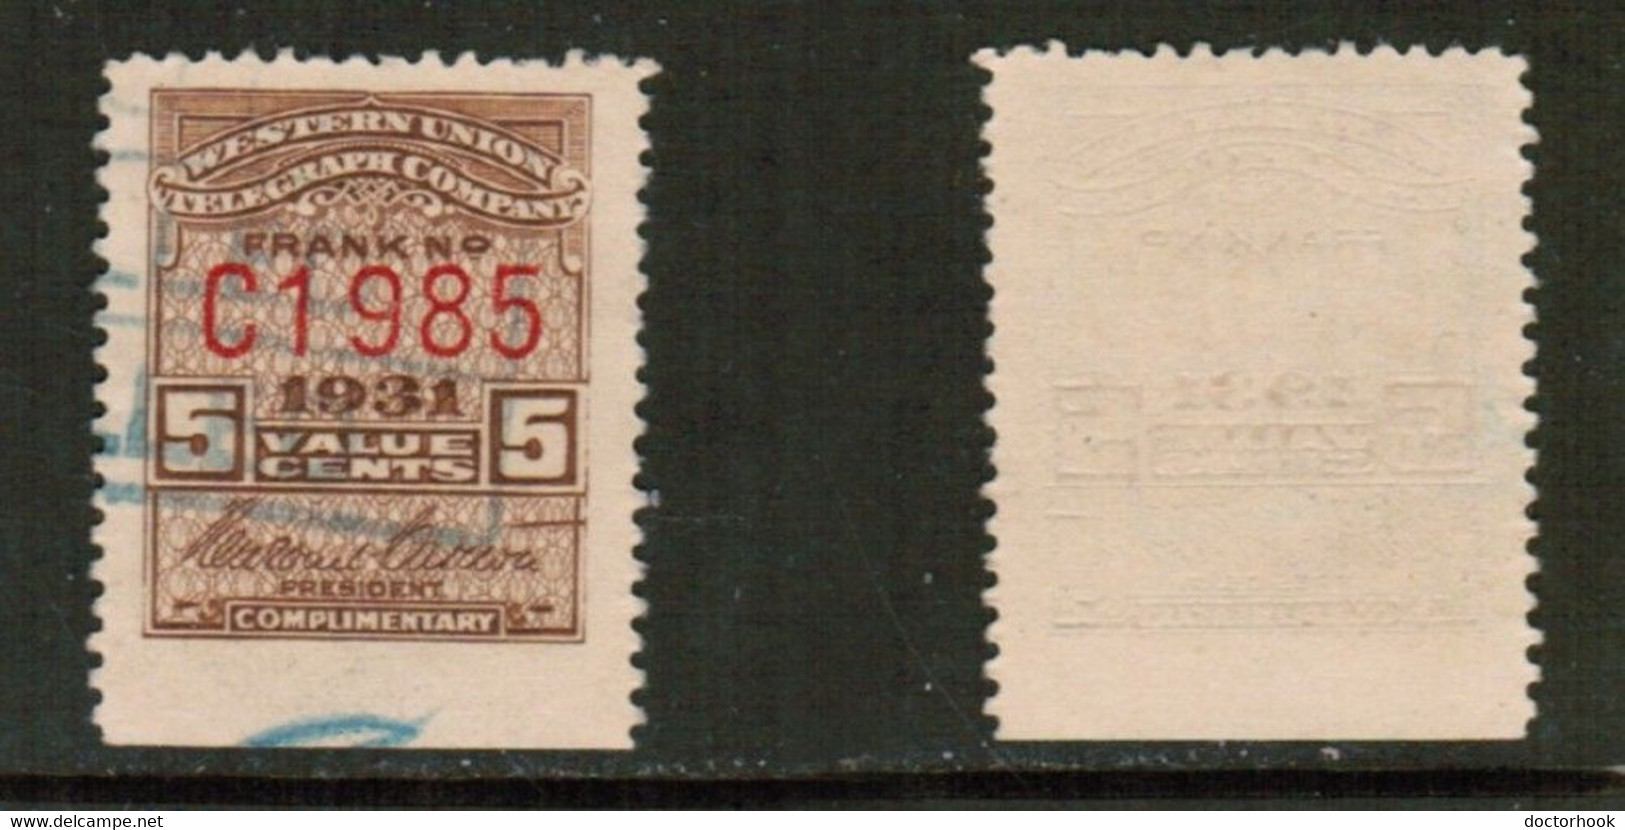 U.S.A.  1931---5 CENT WESTERN UNION TELEGRAPH STAMP USED (CONDITION AS PER SCAN) (Stamp Scan # 839-15) - Telegraafzegels